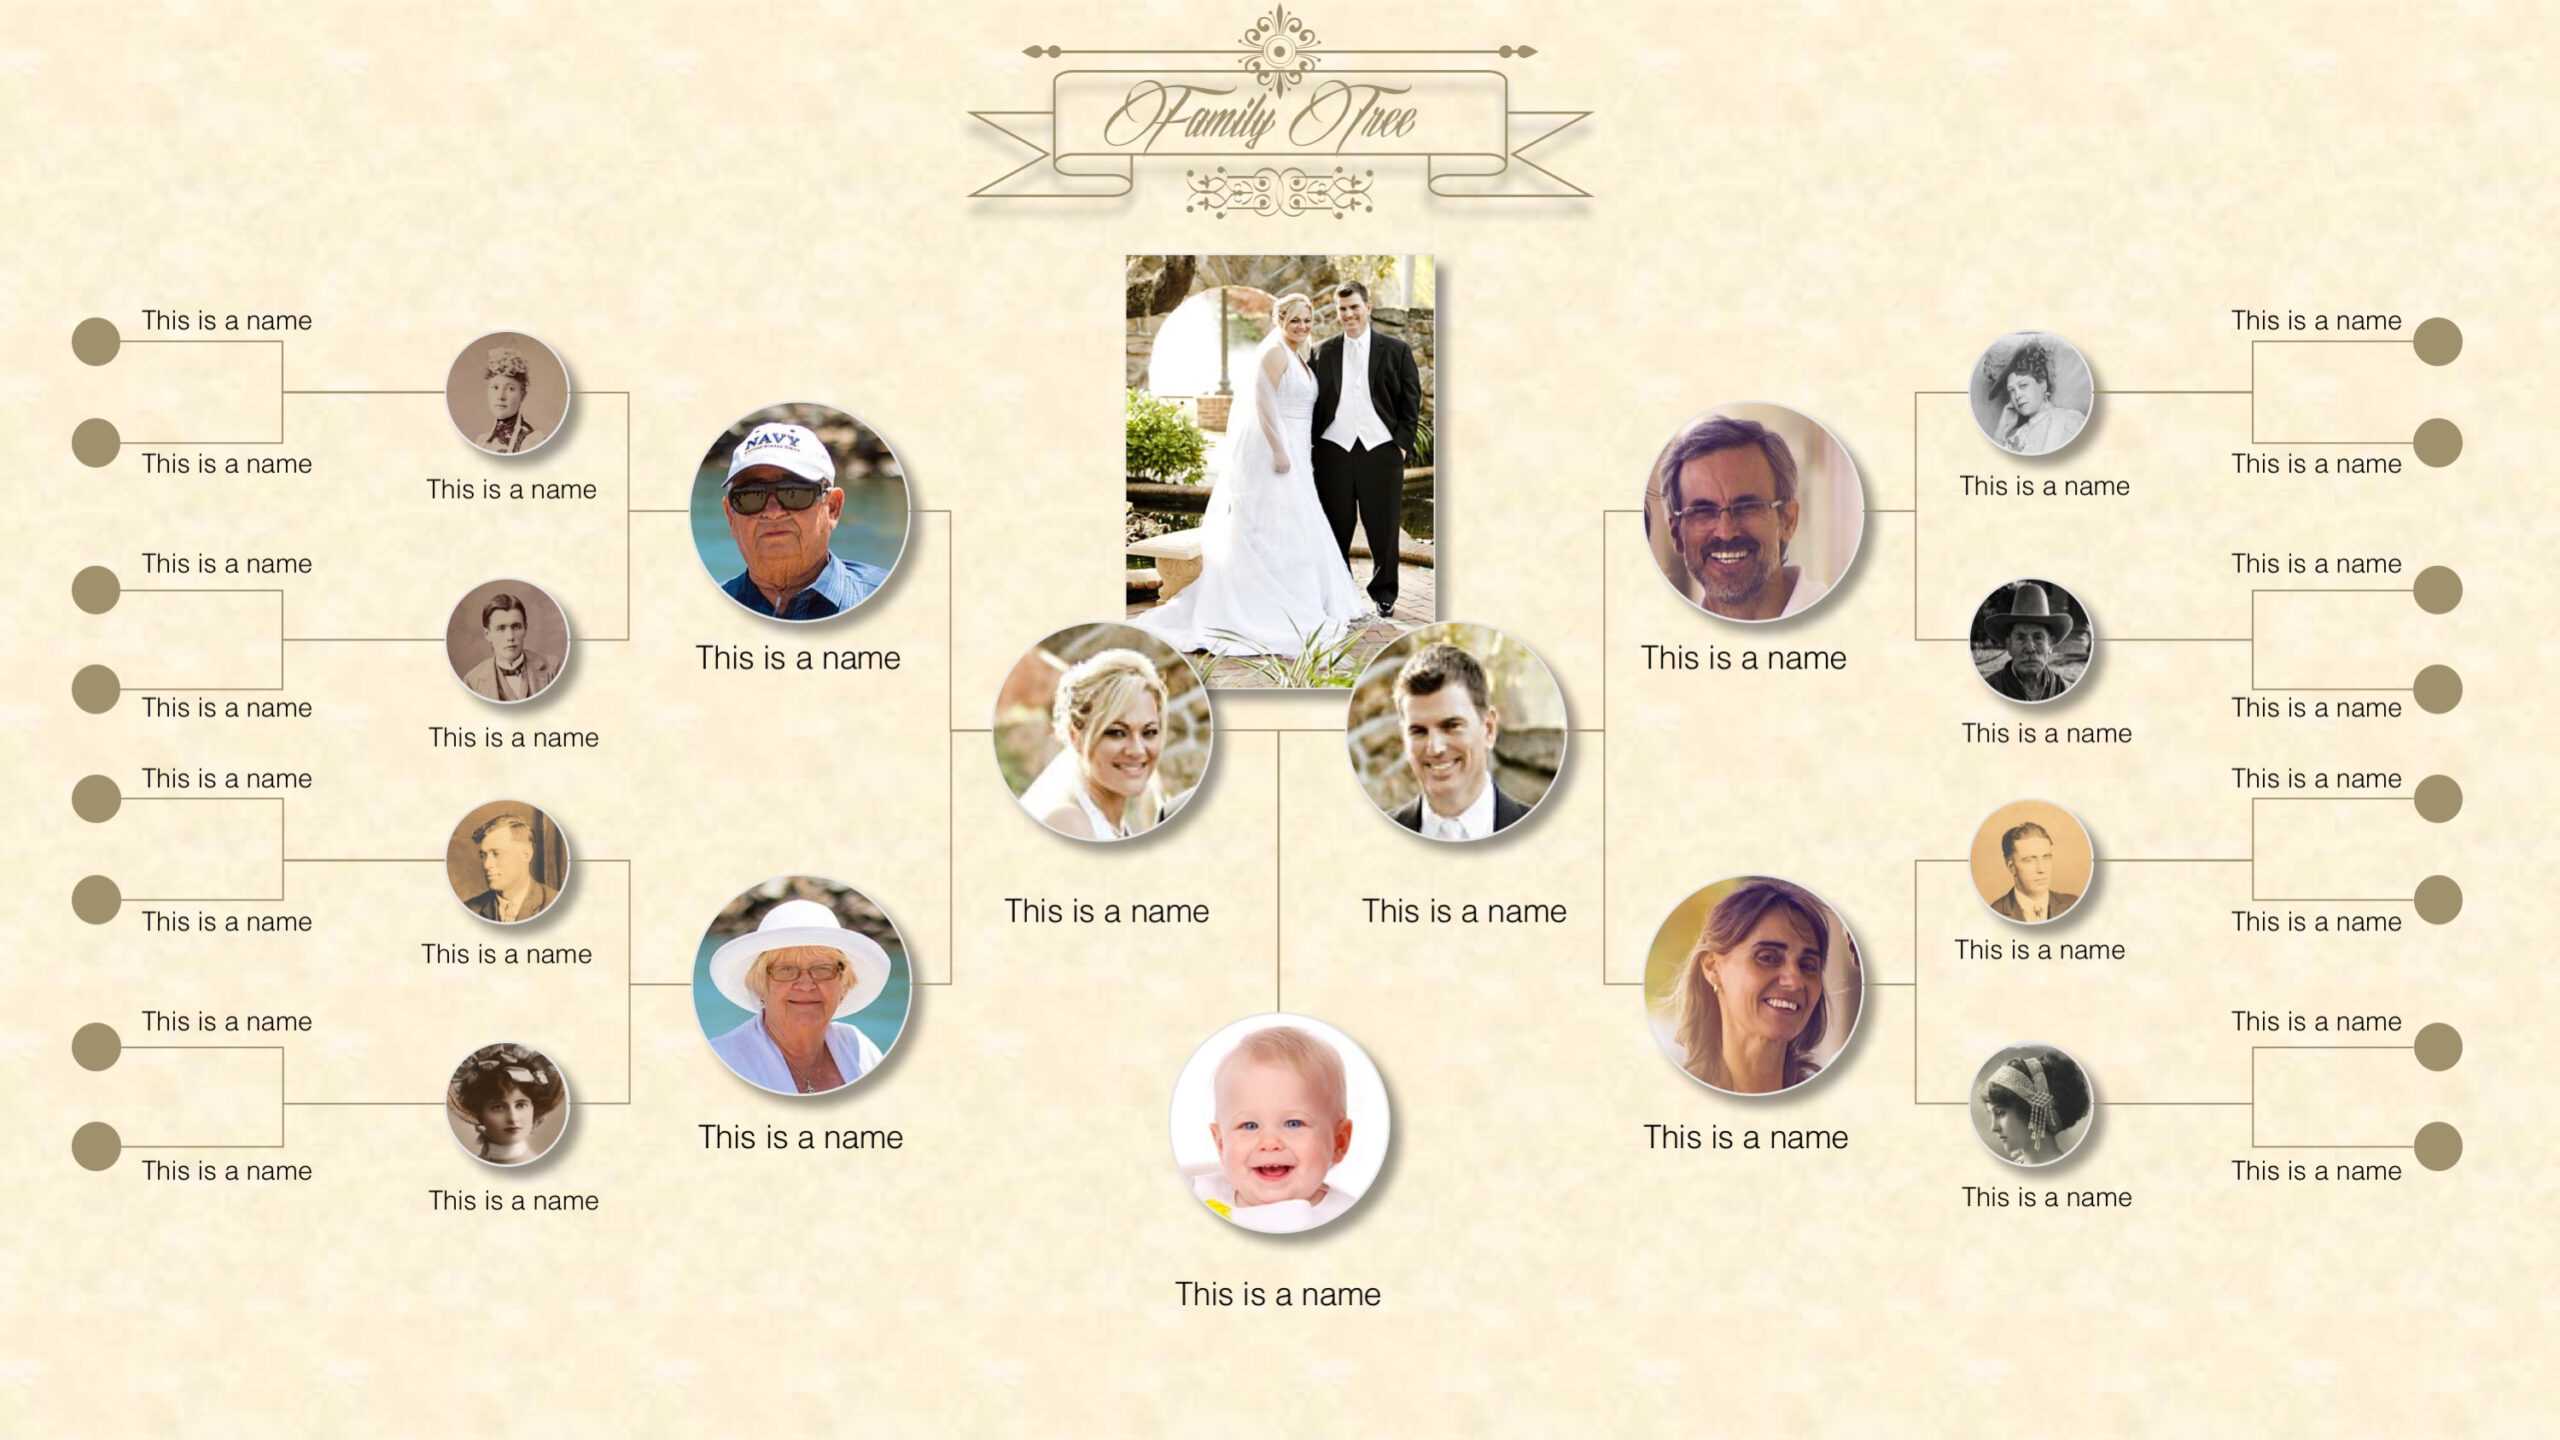 Family Tree Powerpoint Templates Throughout Powerpoint Genealogy Template